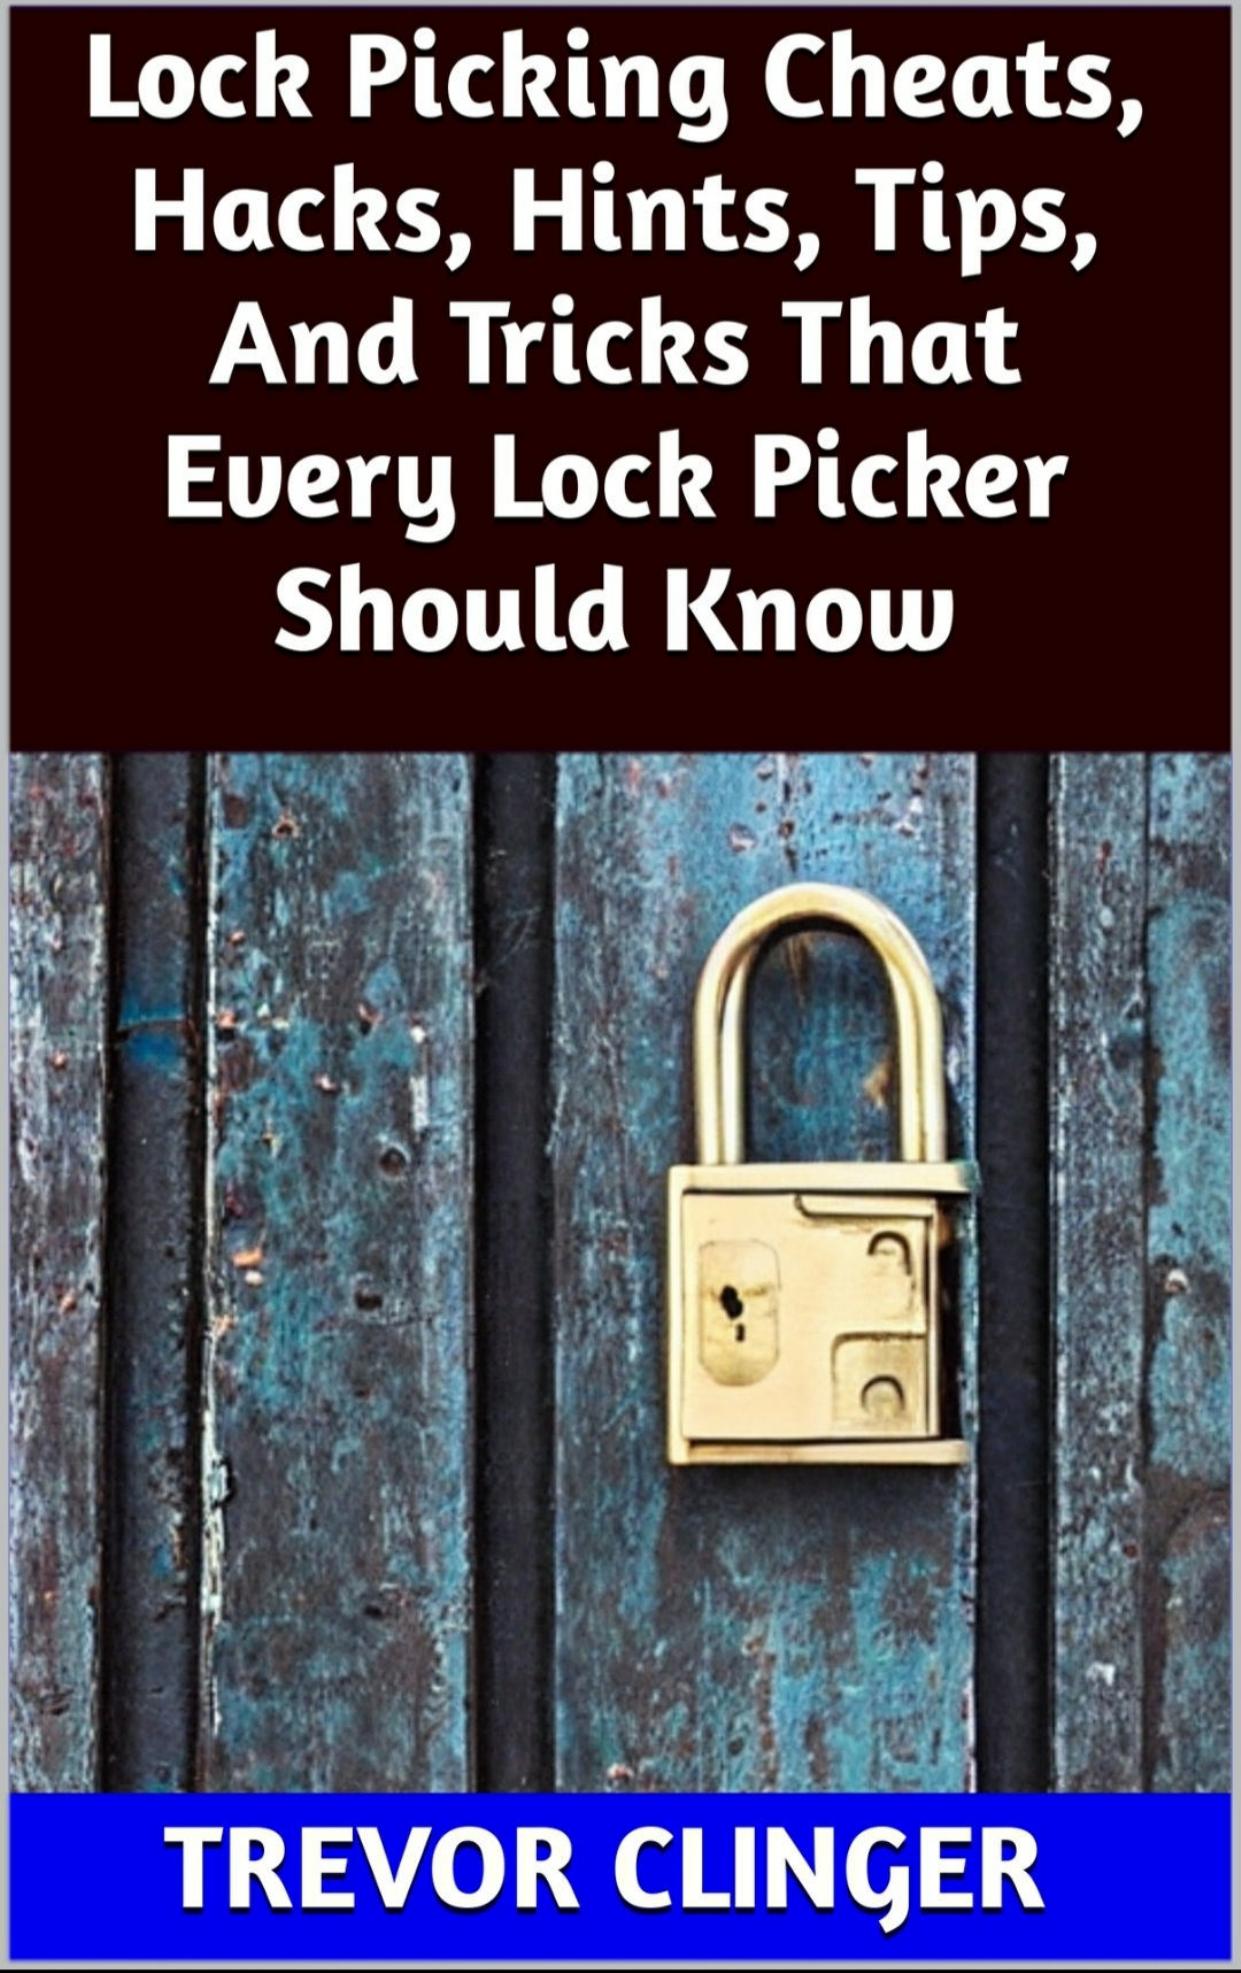 Lock Picking Cheats, Hacks, Hints, Tips, And Tricks That Every Lock Picker Should Know by Trevor Clinger